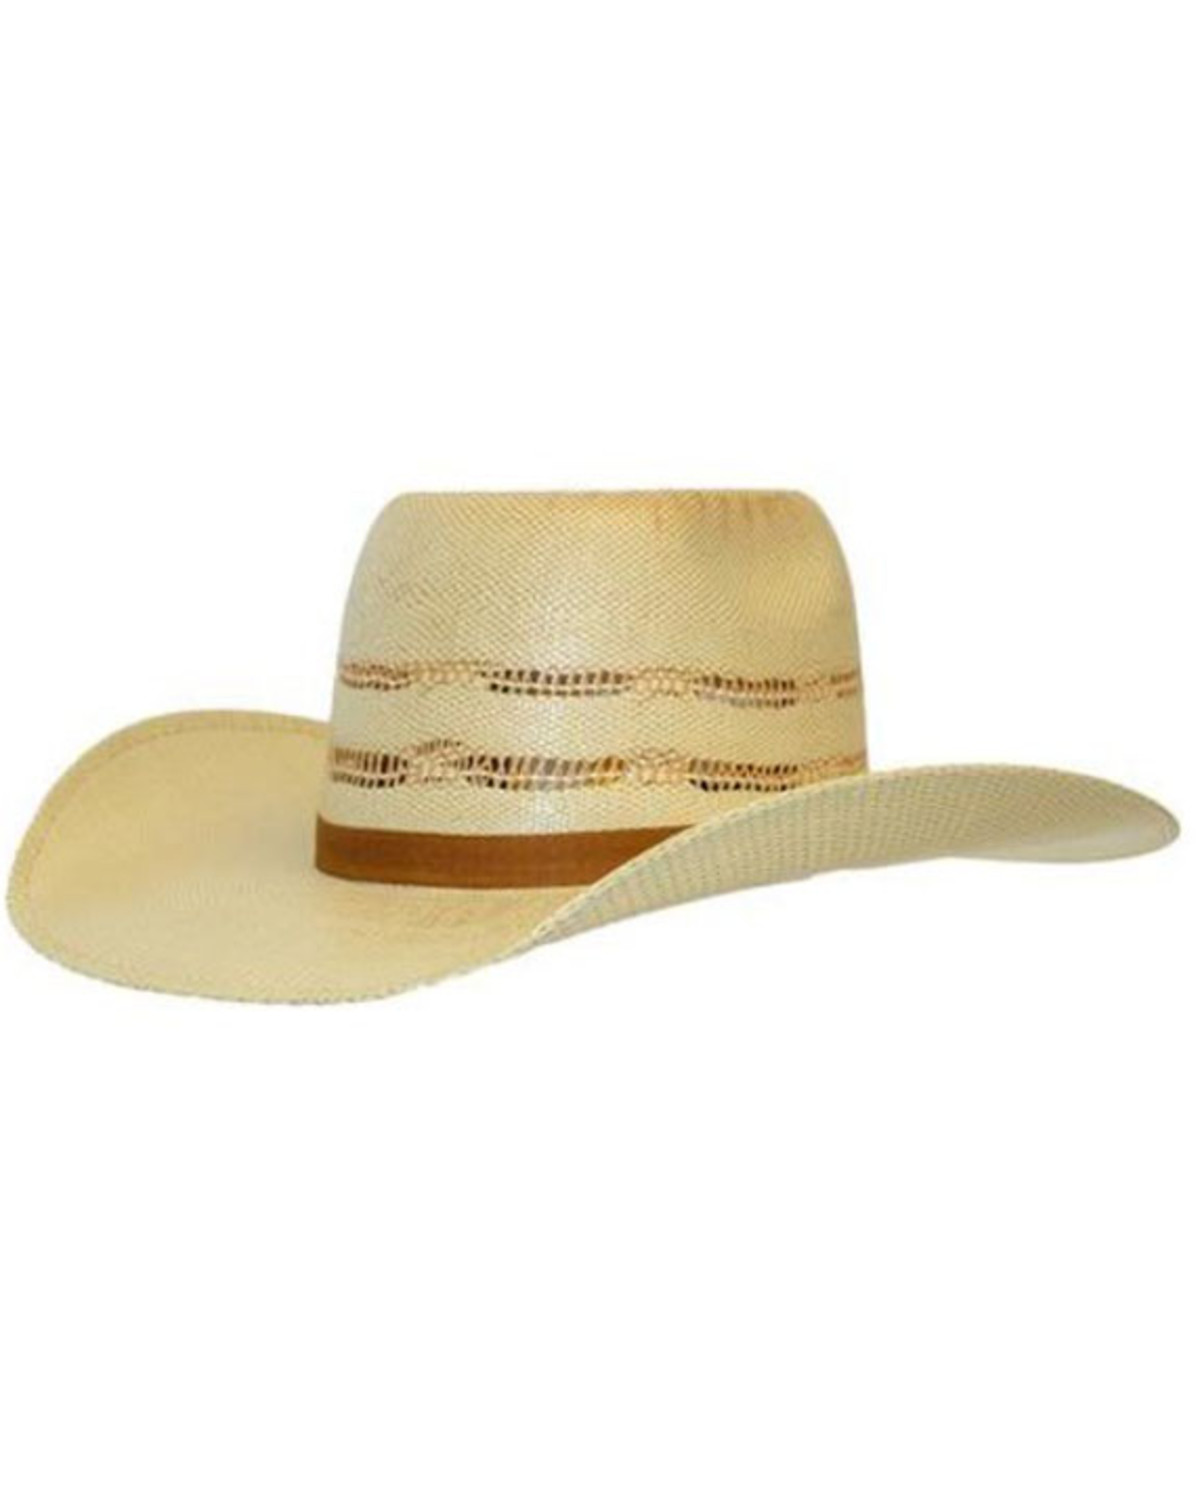 Ariat Youth Light Brown Straw Twister Western Hat | Sheplers